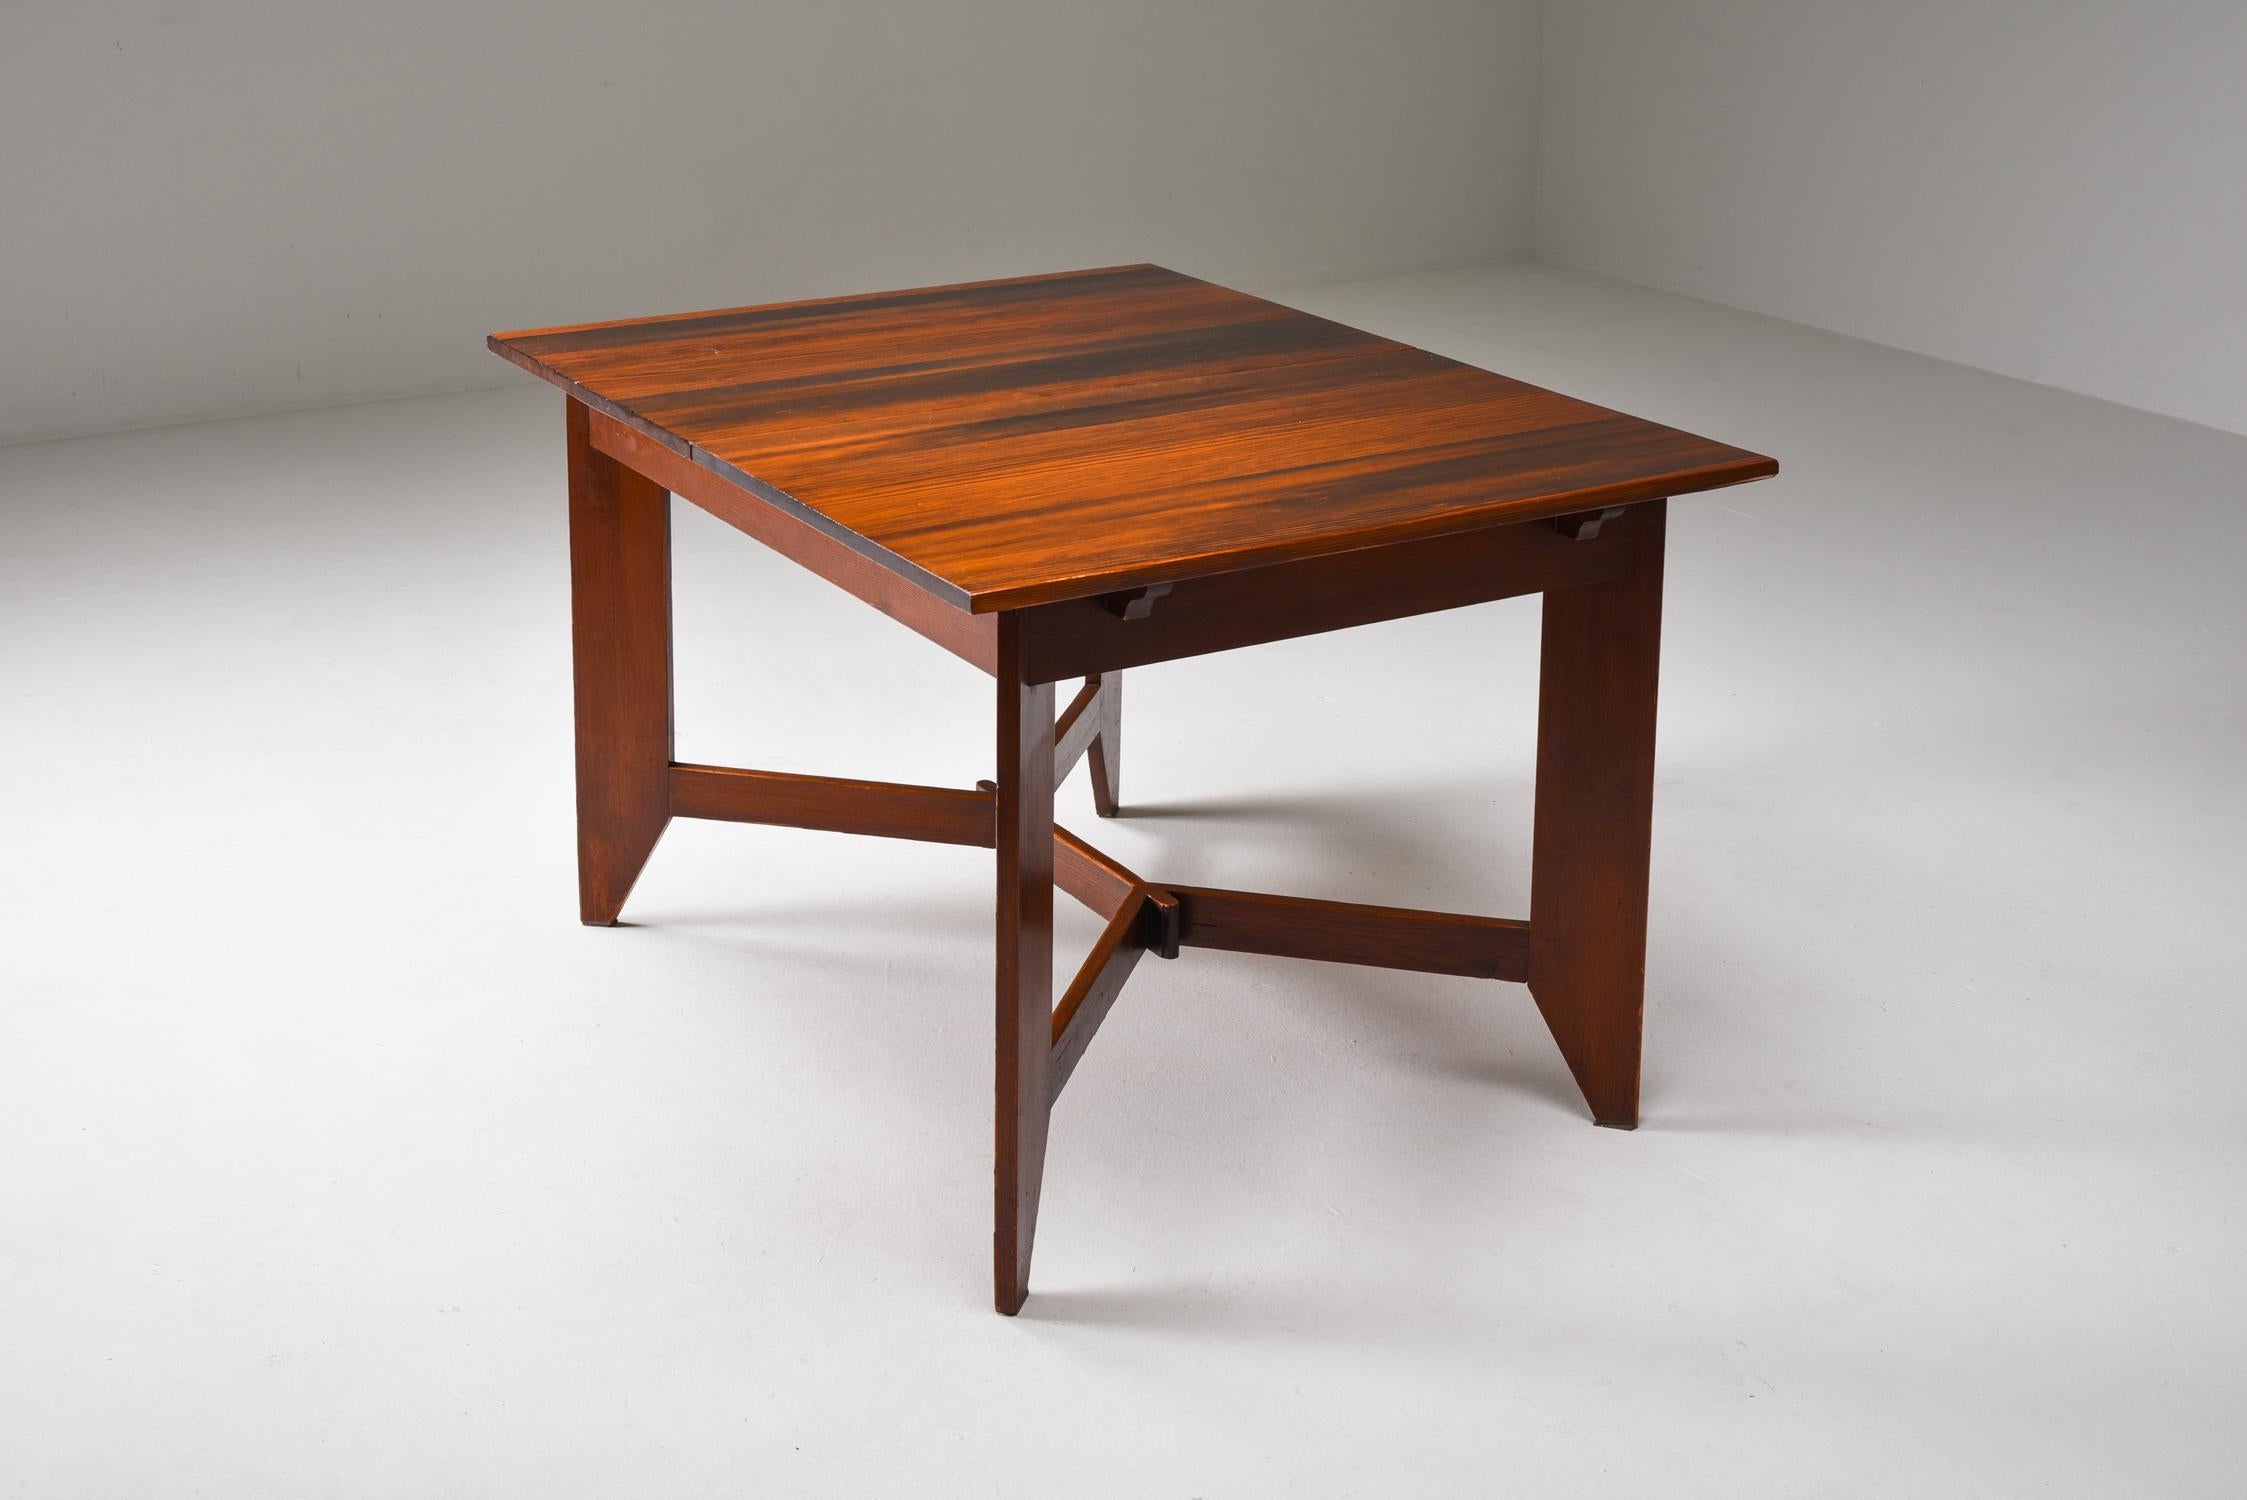 Mid-20th Century Modernist Dining Table by H. Wouda